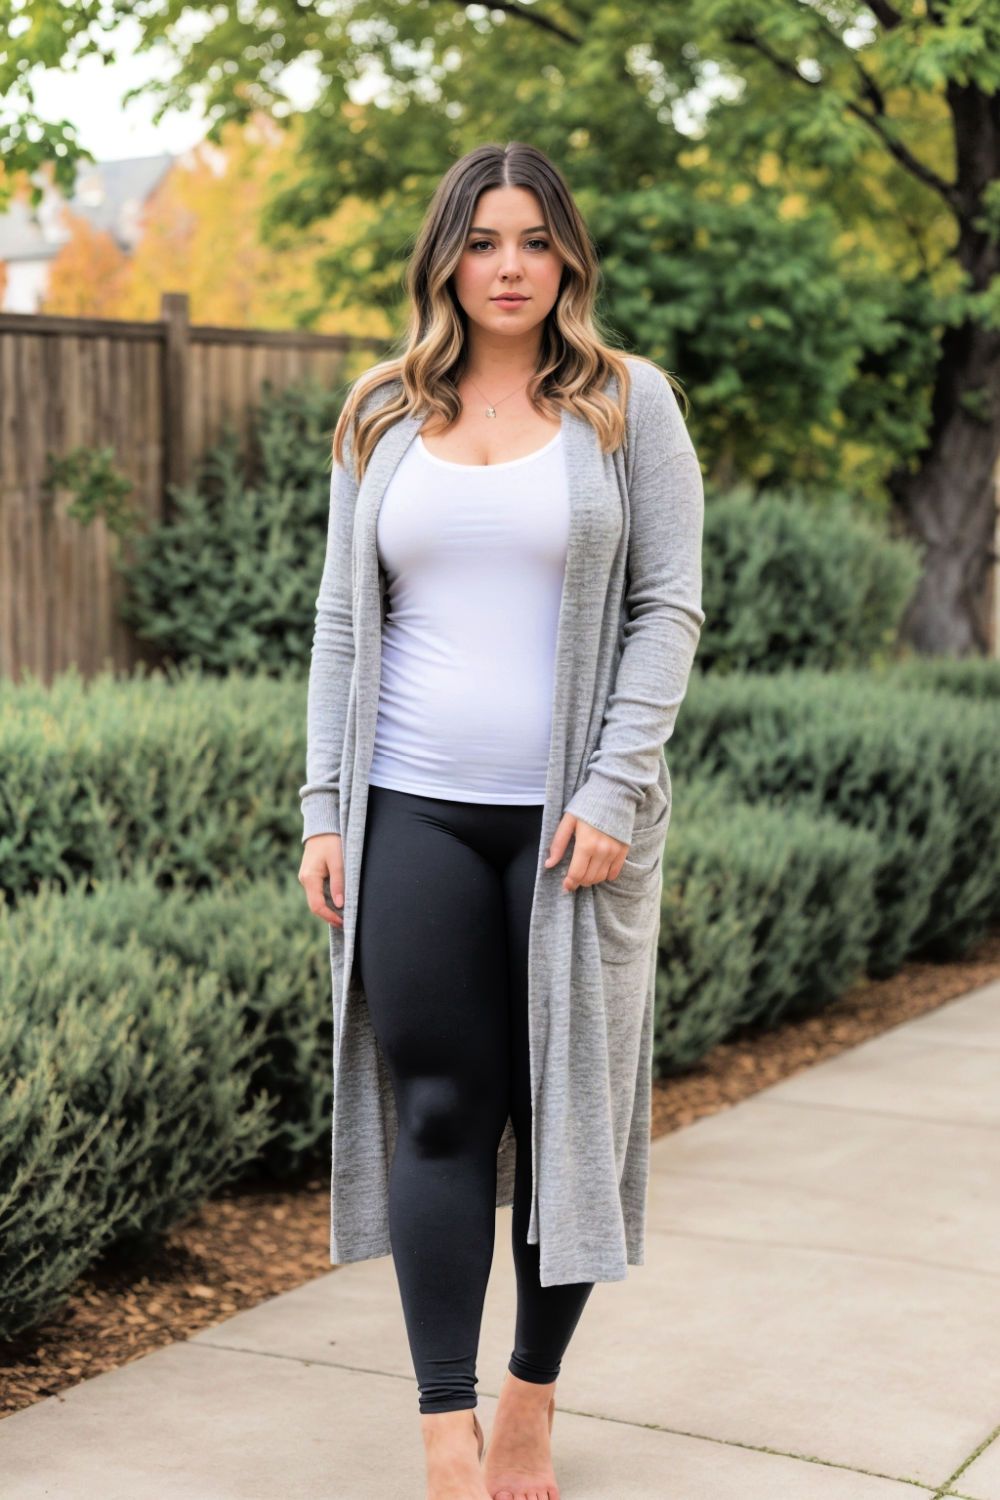 Layered Look with a Long Cardigan